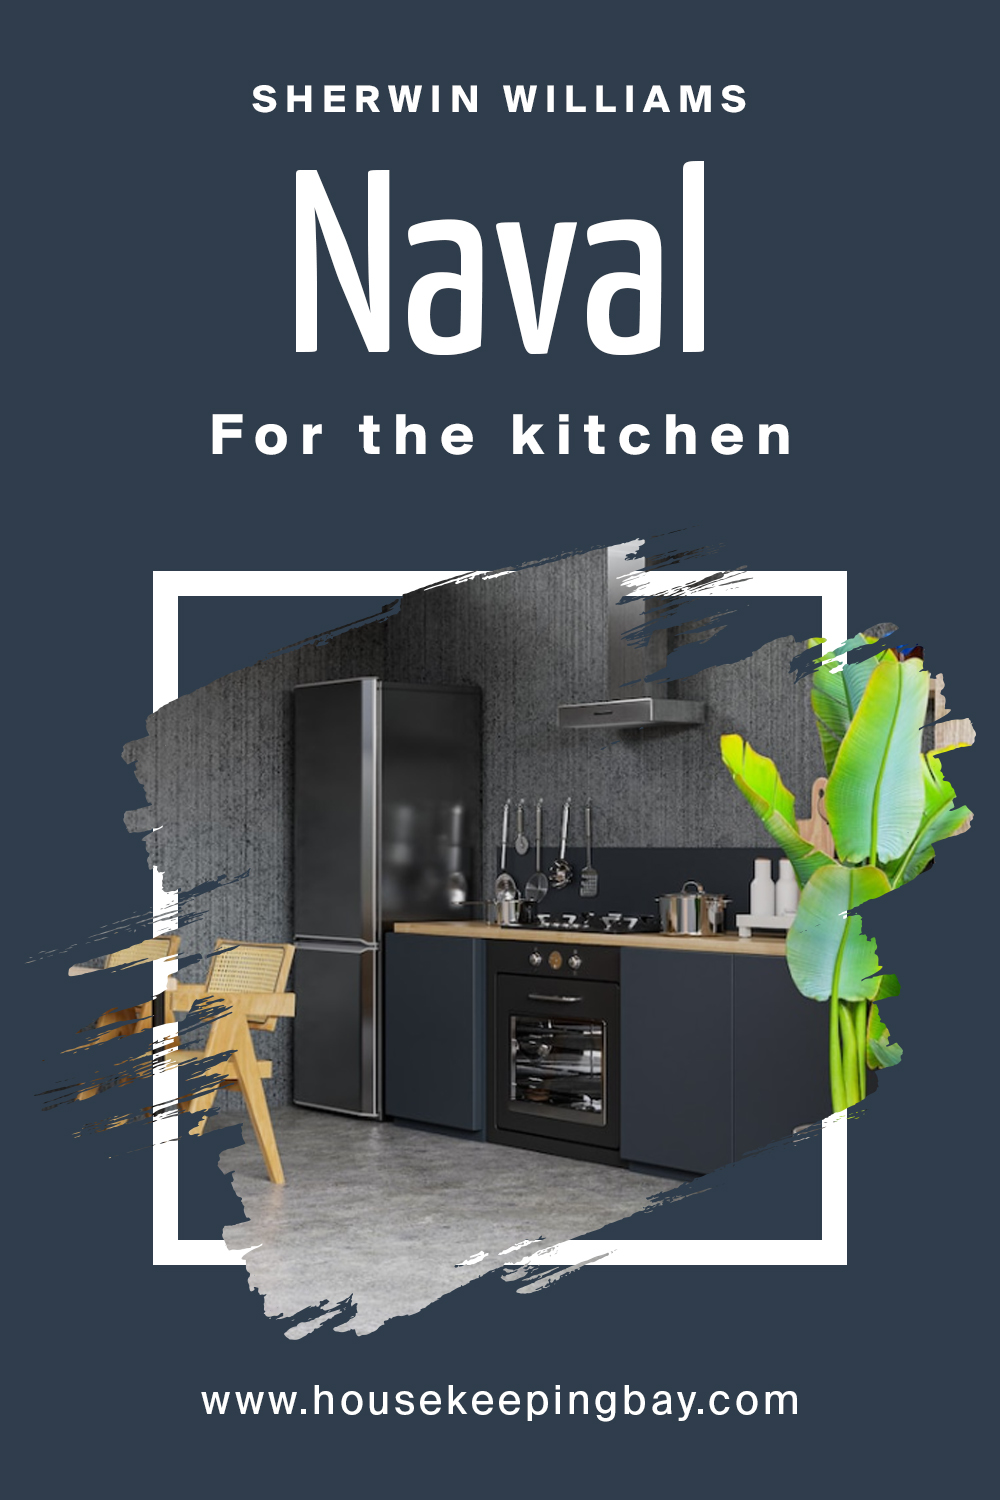 Sherwin Williams. Naval For the kitchen